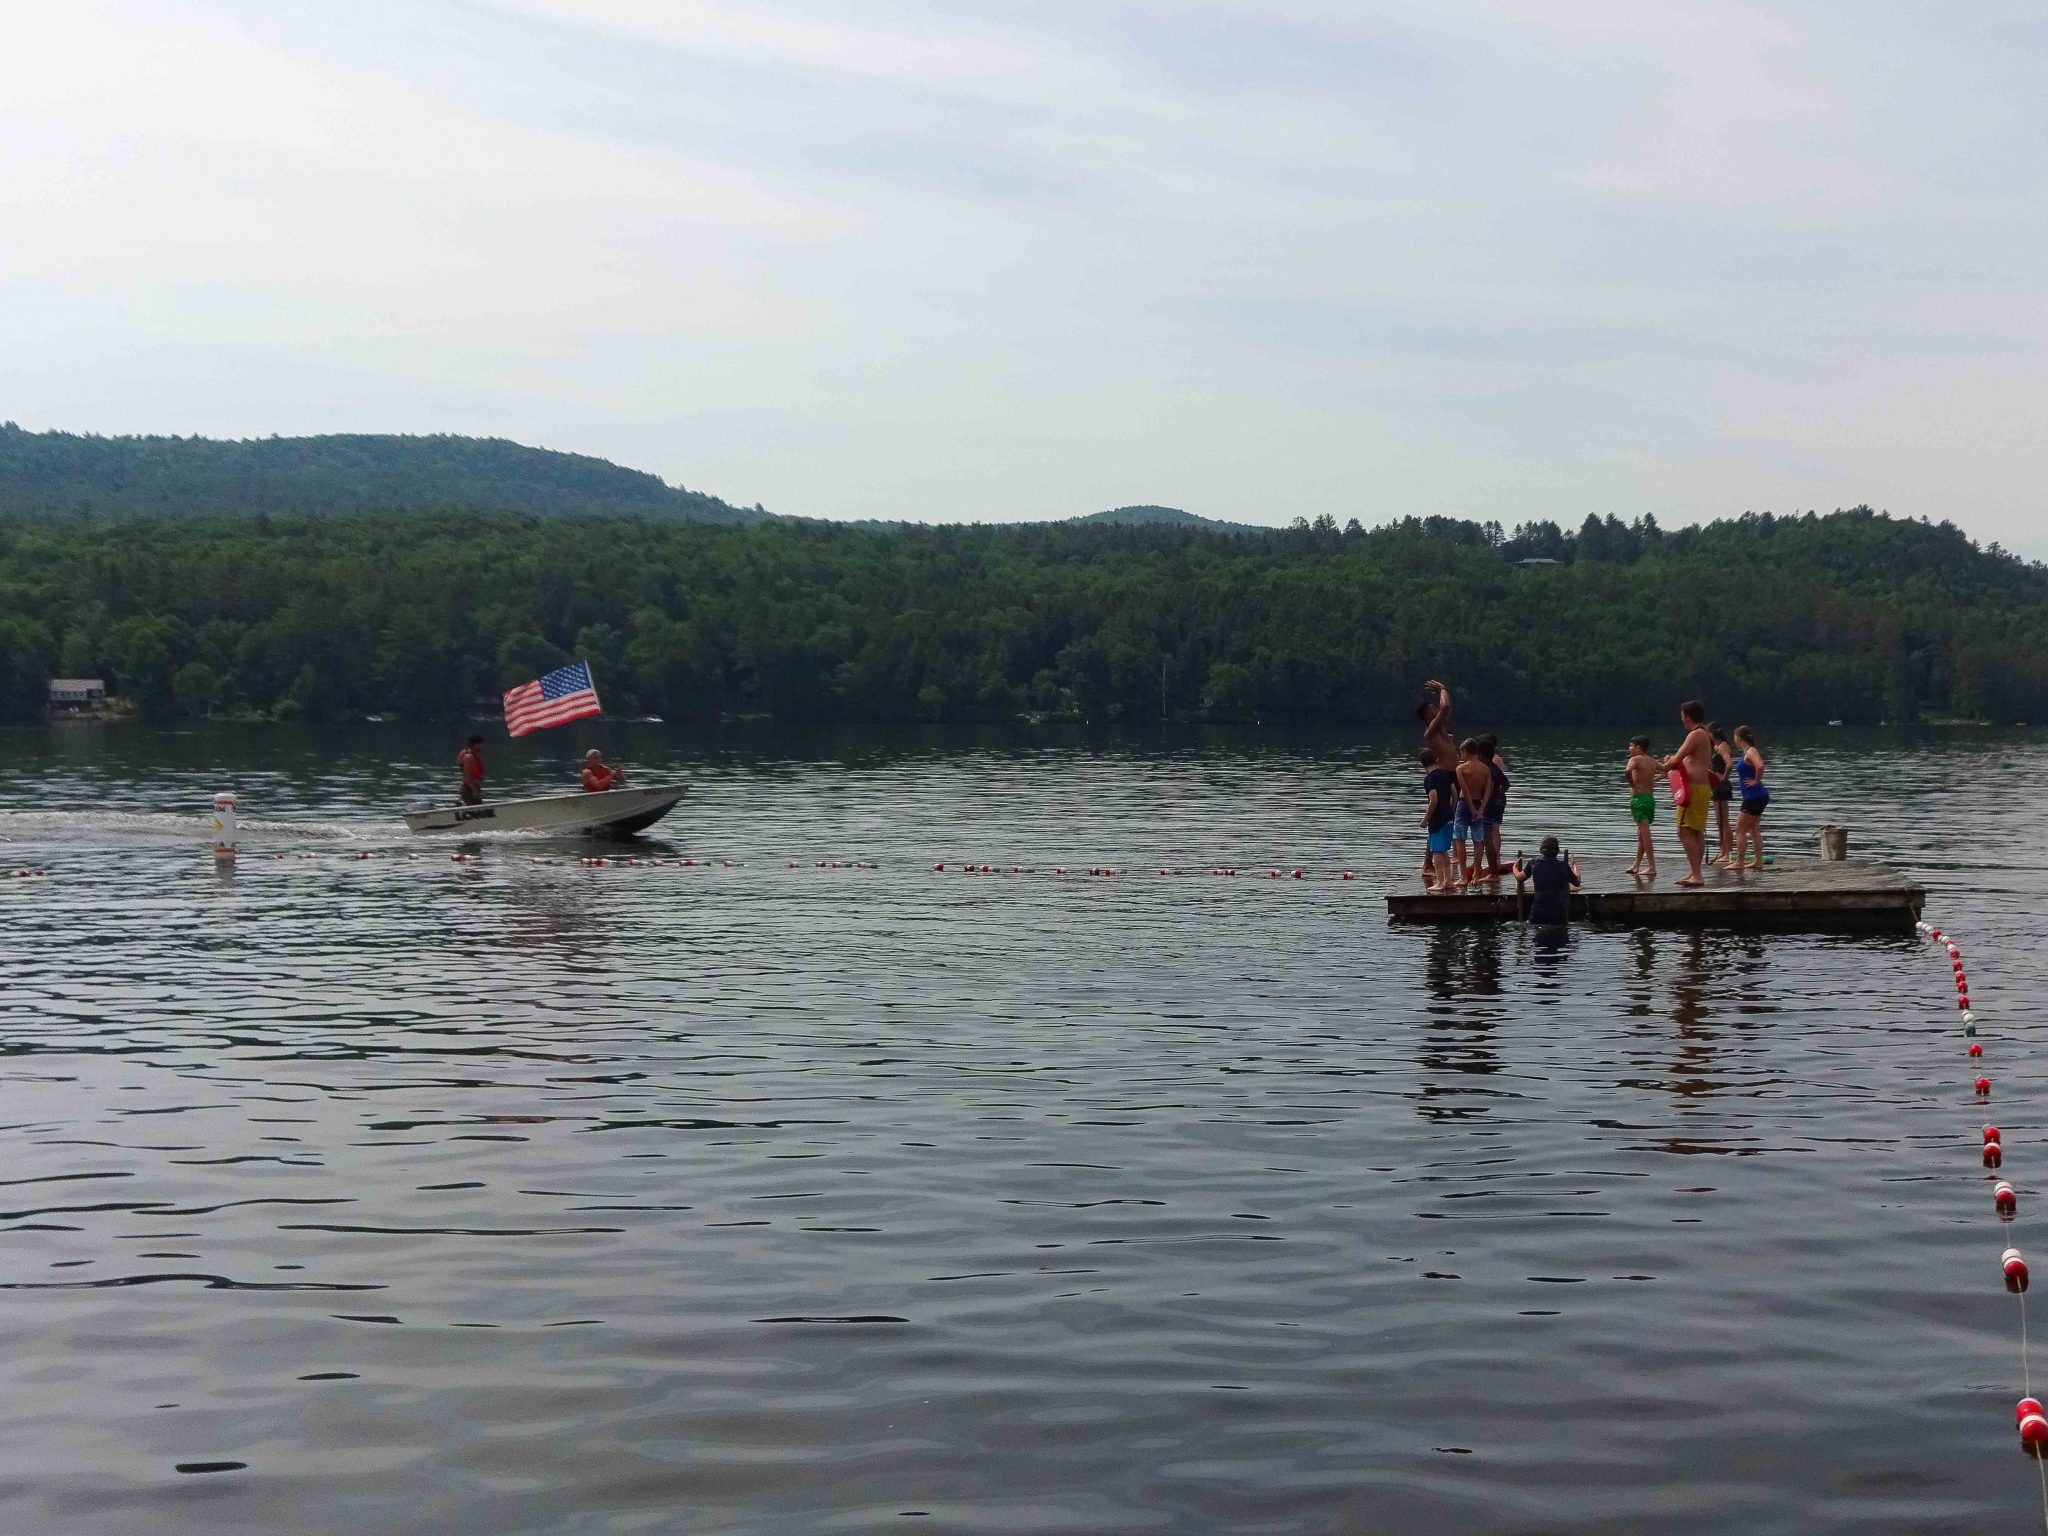 A Horizons group gathered on the floating docs while a motor boat with an American flag drives by.